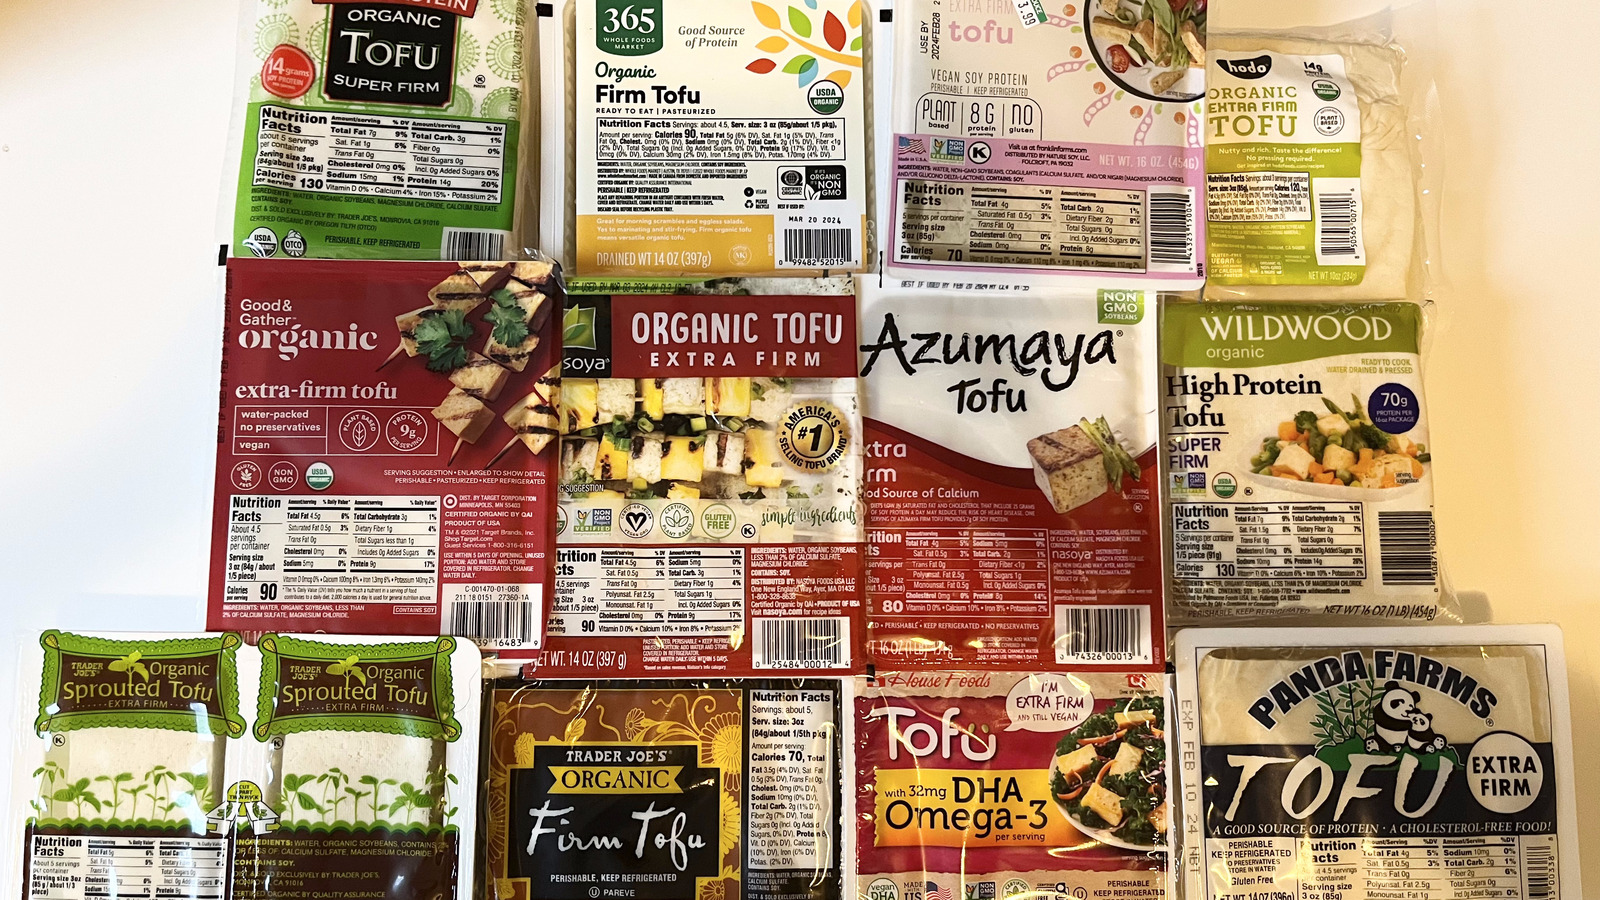 https://www.tastingtable.com/img/gallery/12-store-bought-tofu-brands-ranked-worst-to-best/l-intro-1706025560.jpg